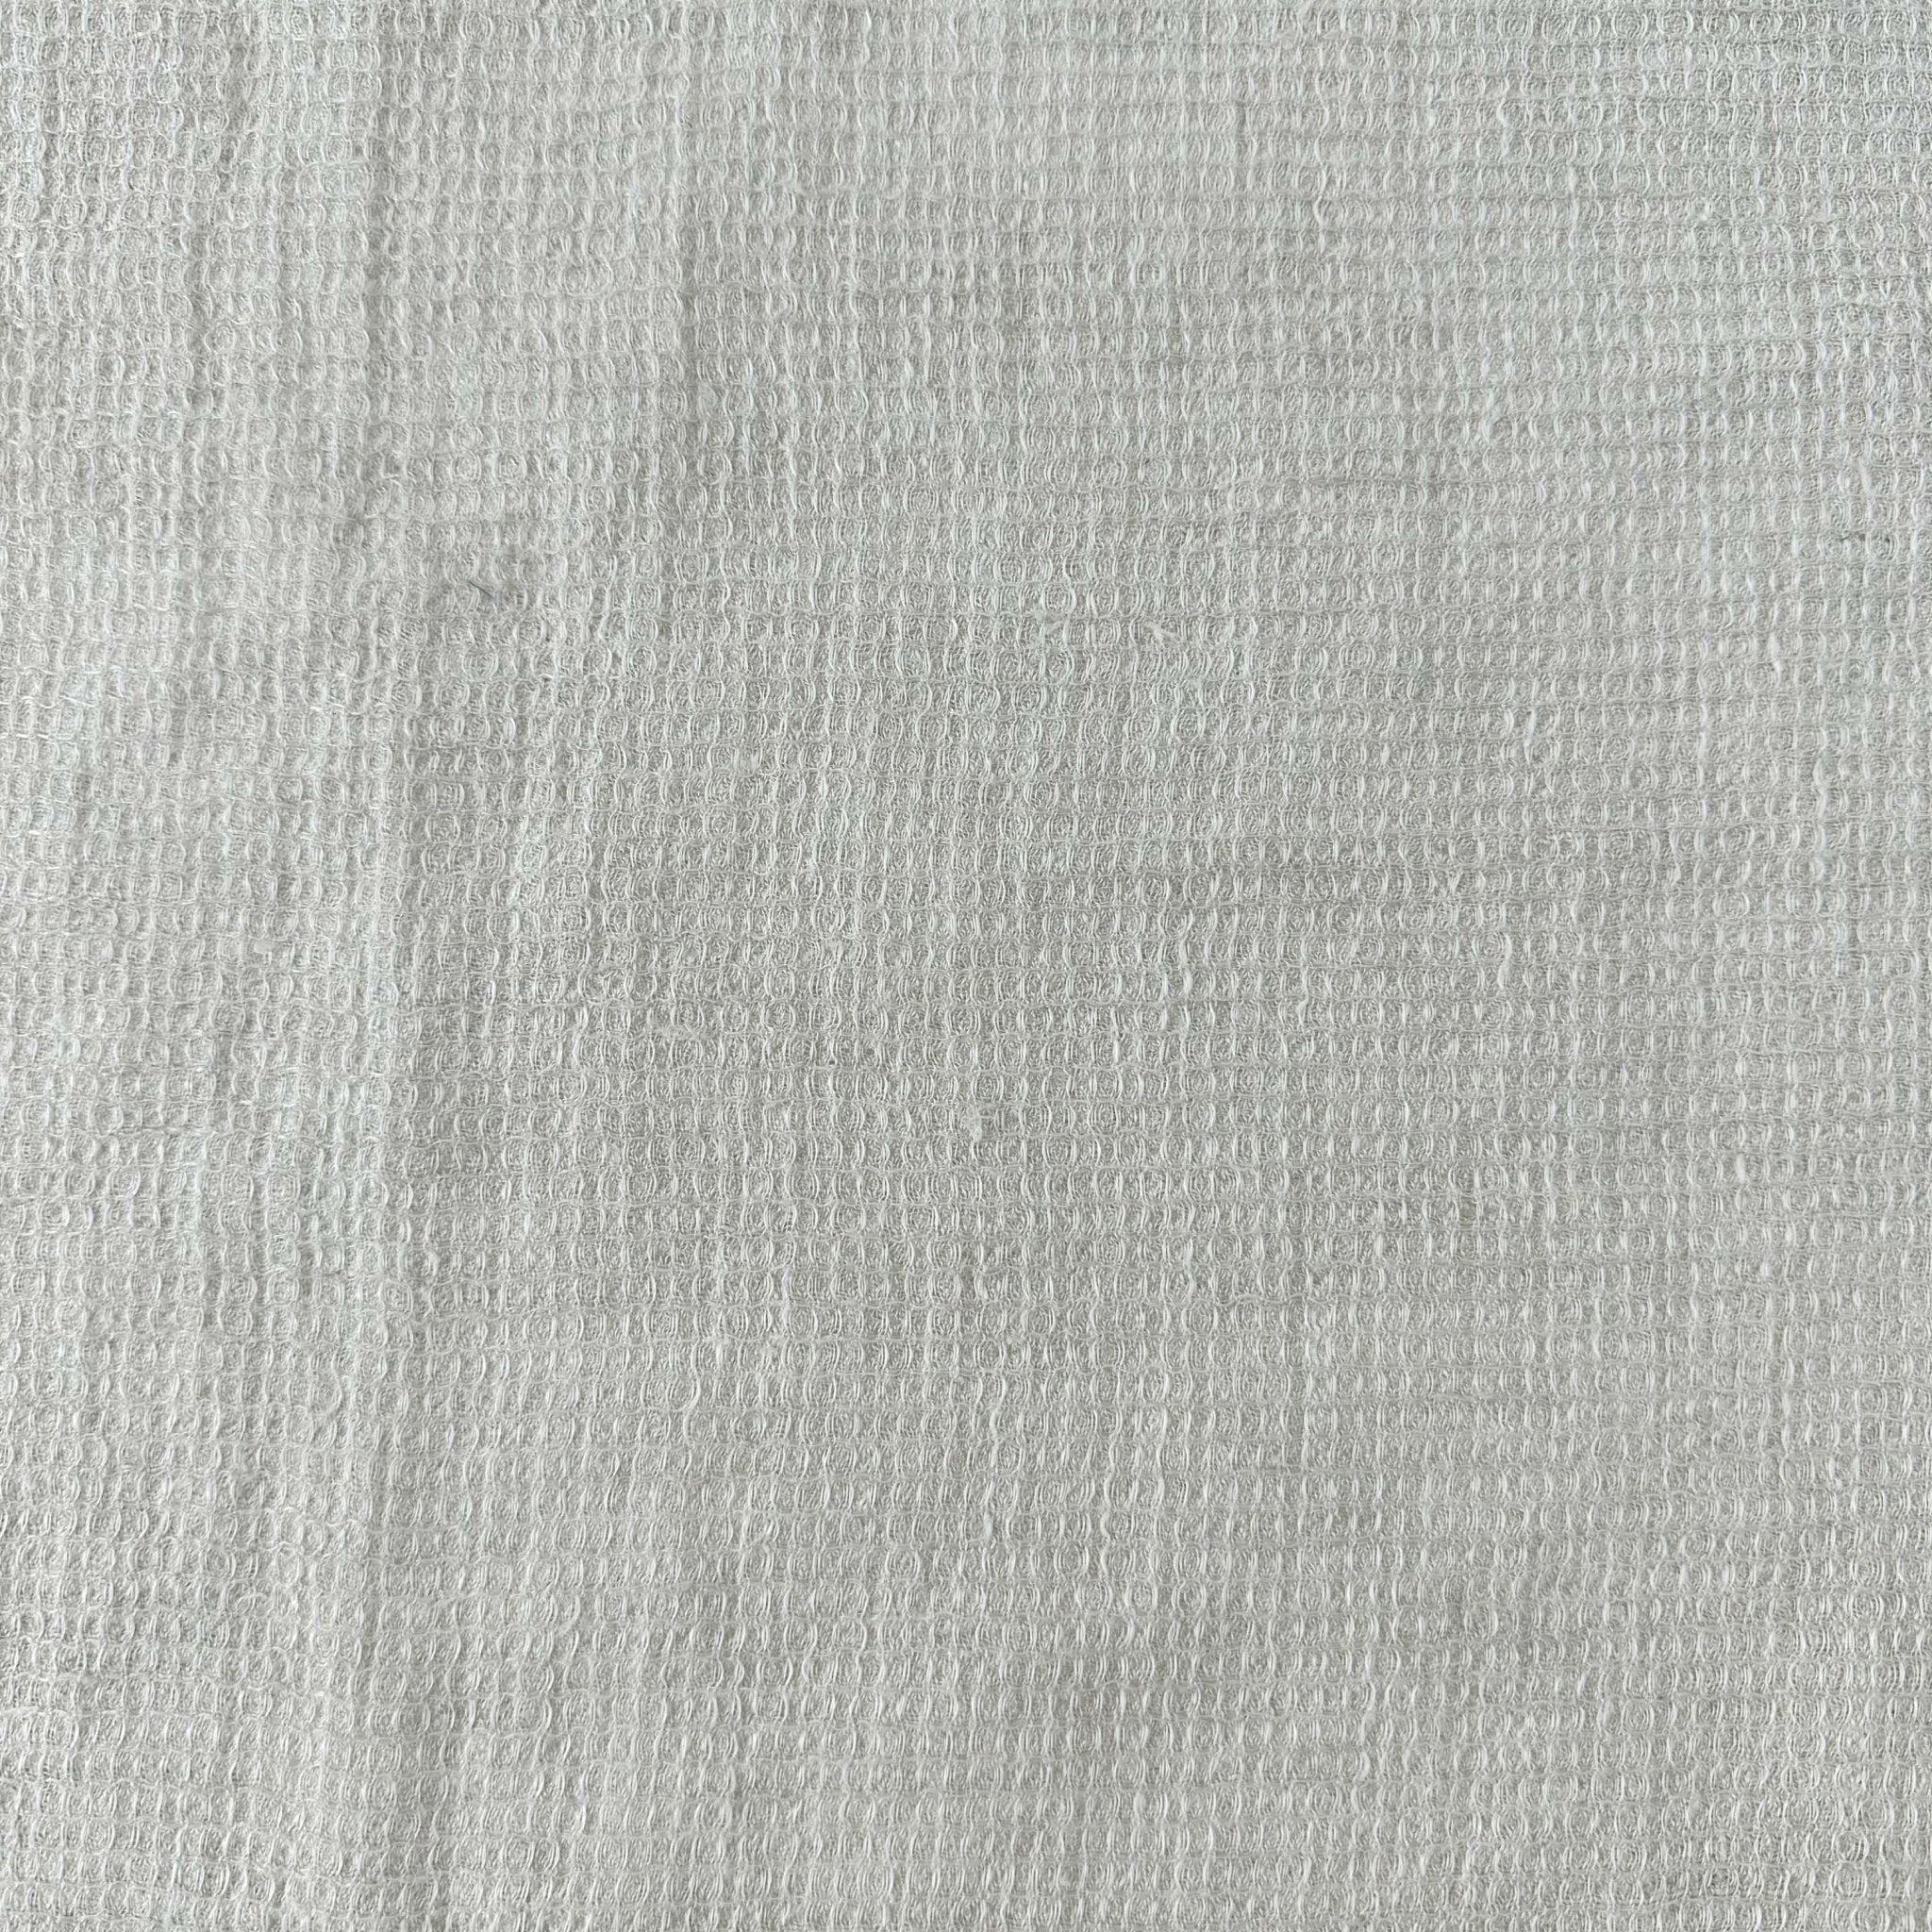 Linen Waffle Tweed Fabric 7349 7350 - The Linen Lab - Natural